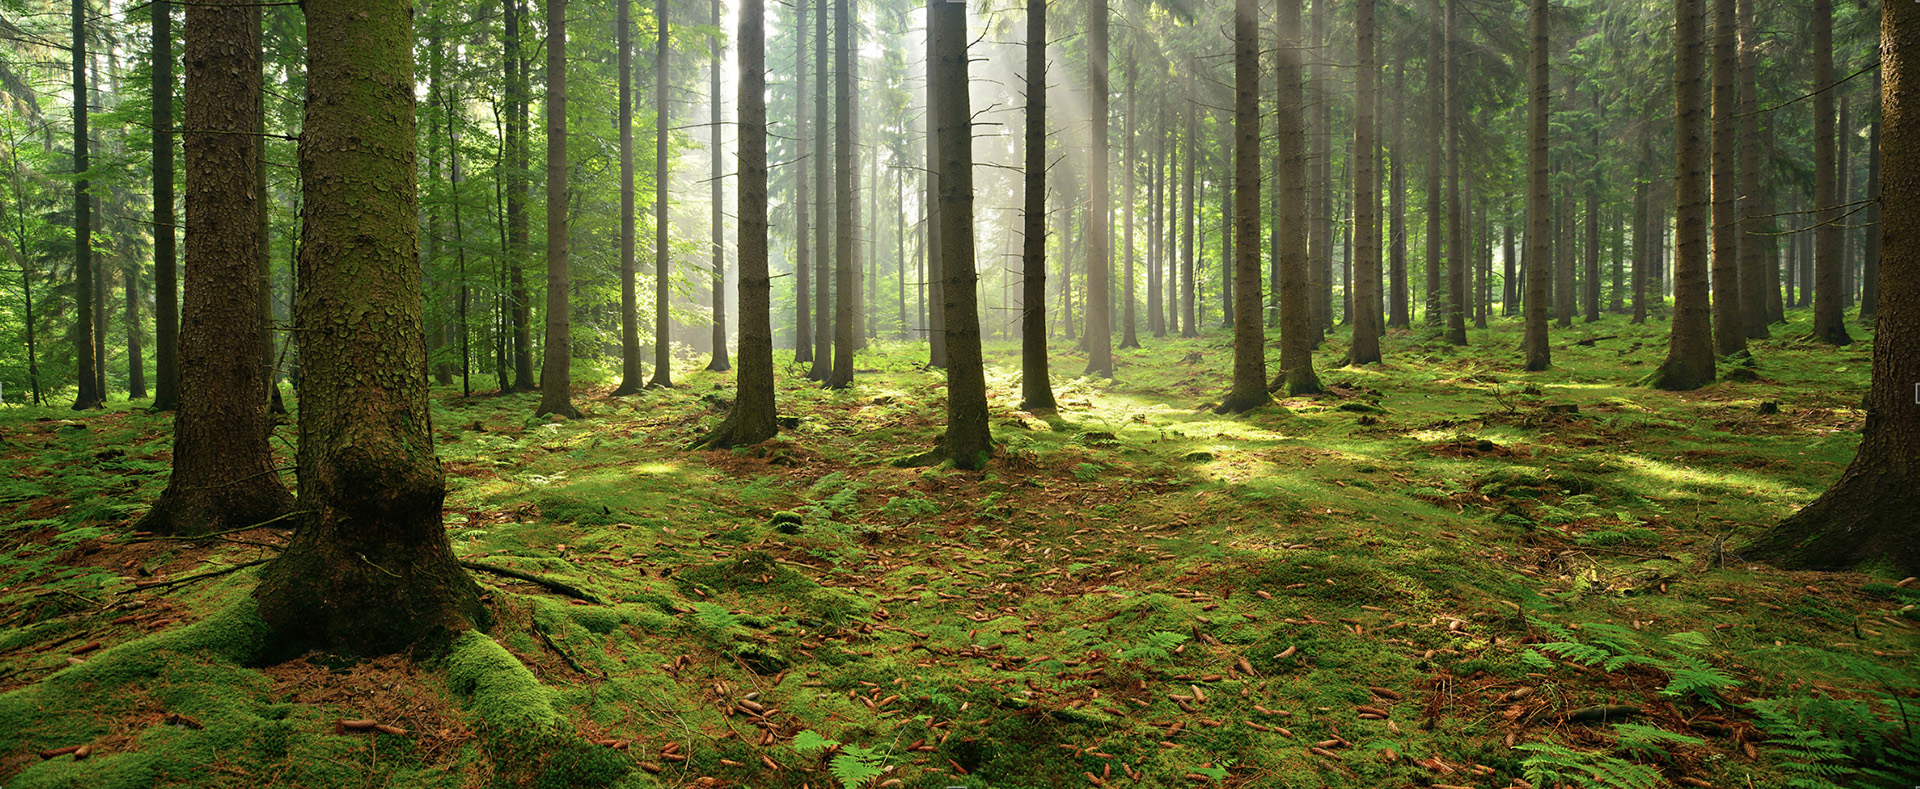 Sunlight filters through a verdant forest, casting a mystical glow over a carpet of lush ferns and mossy grounds.